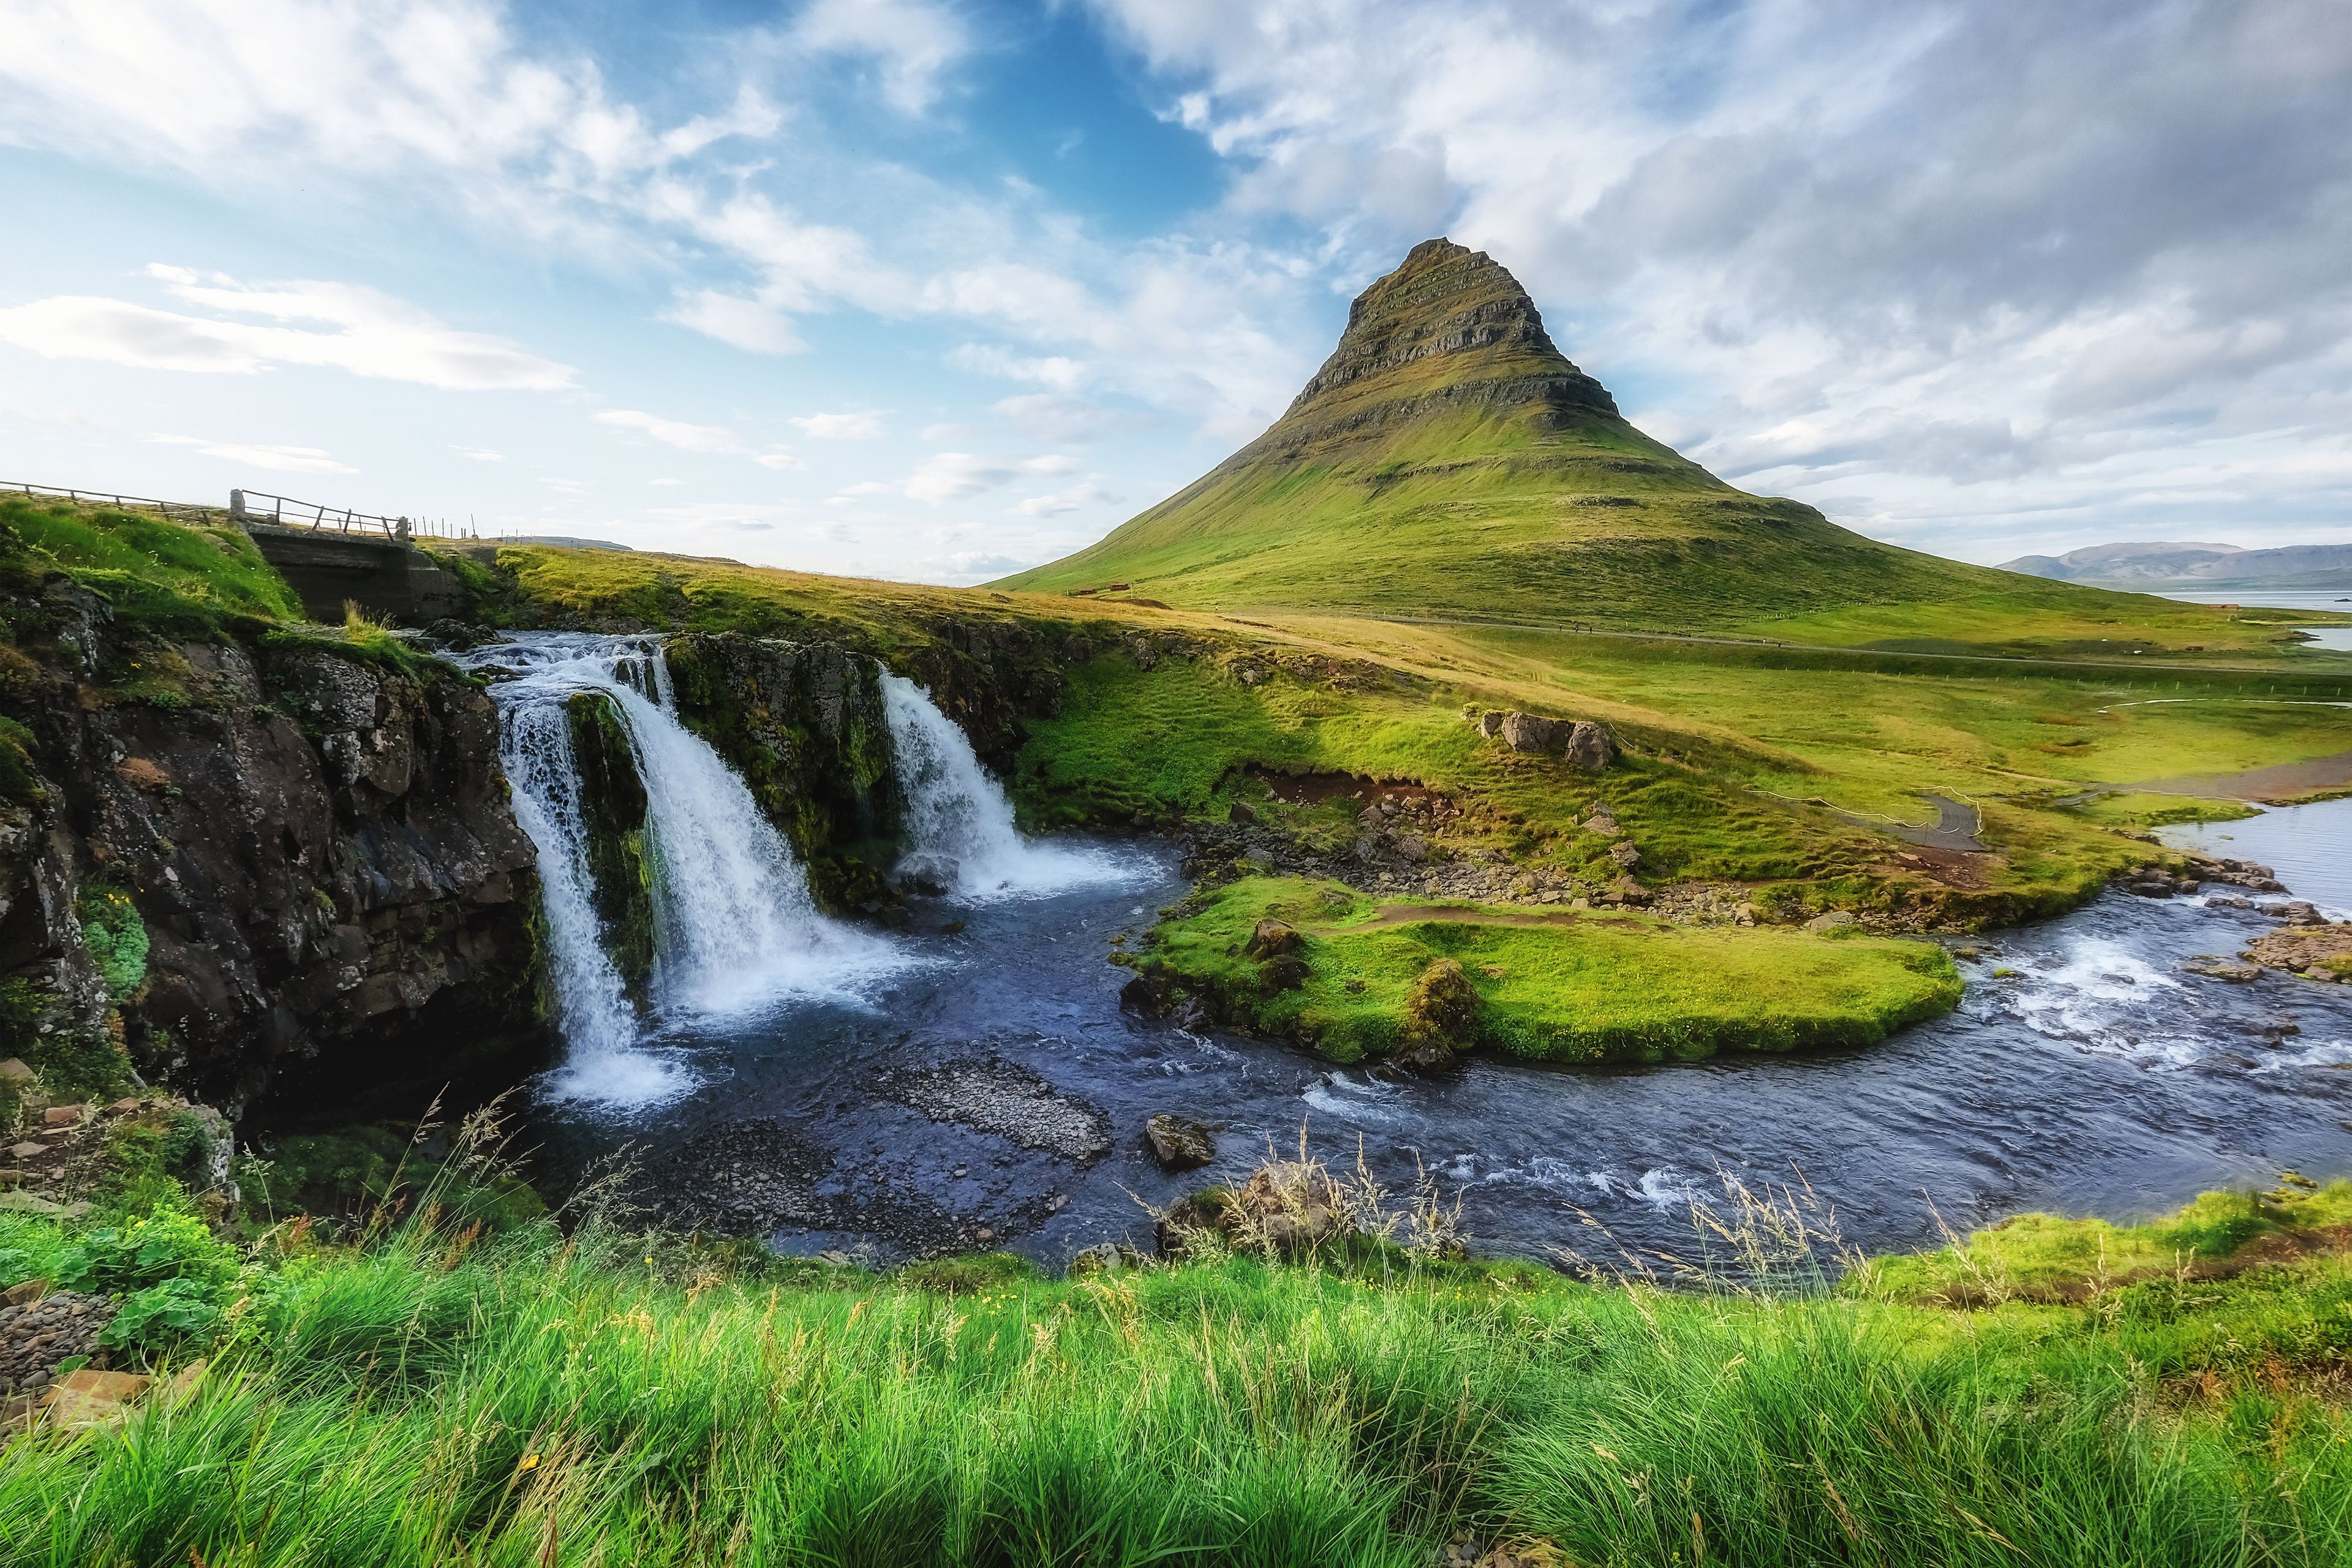 A stunning image of Kirkjufell, one of the most impressive geological wonders in the area.